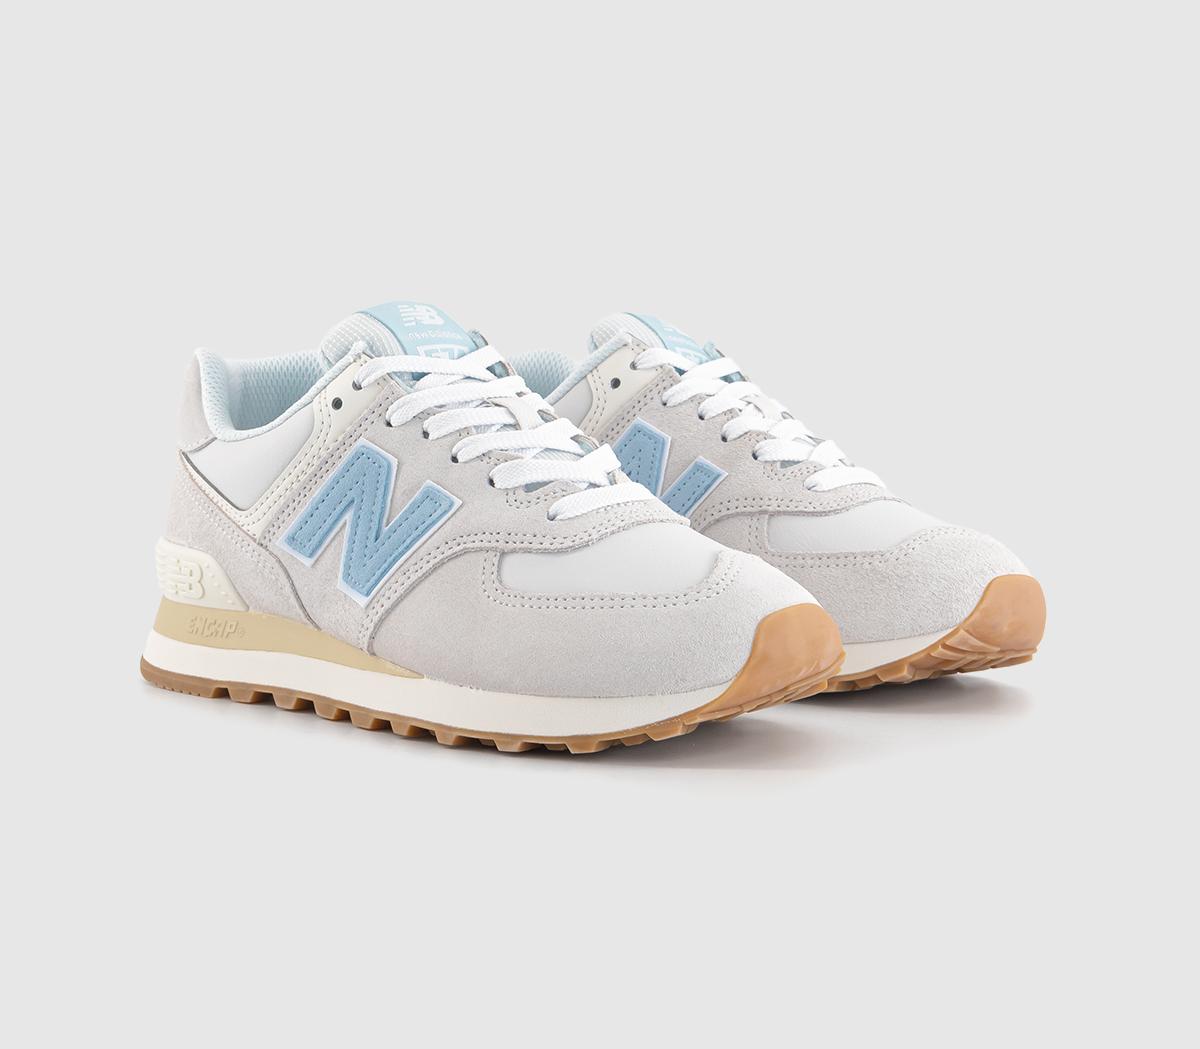 New Balance Mens 574 Trainers Reflection Natural, 7